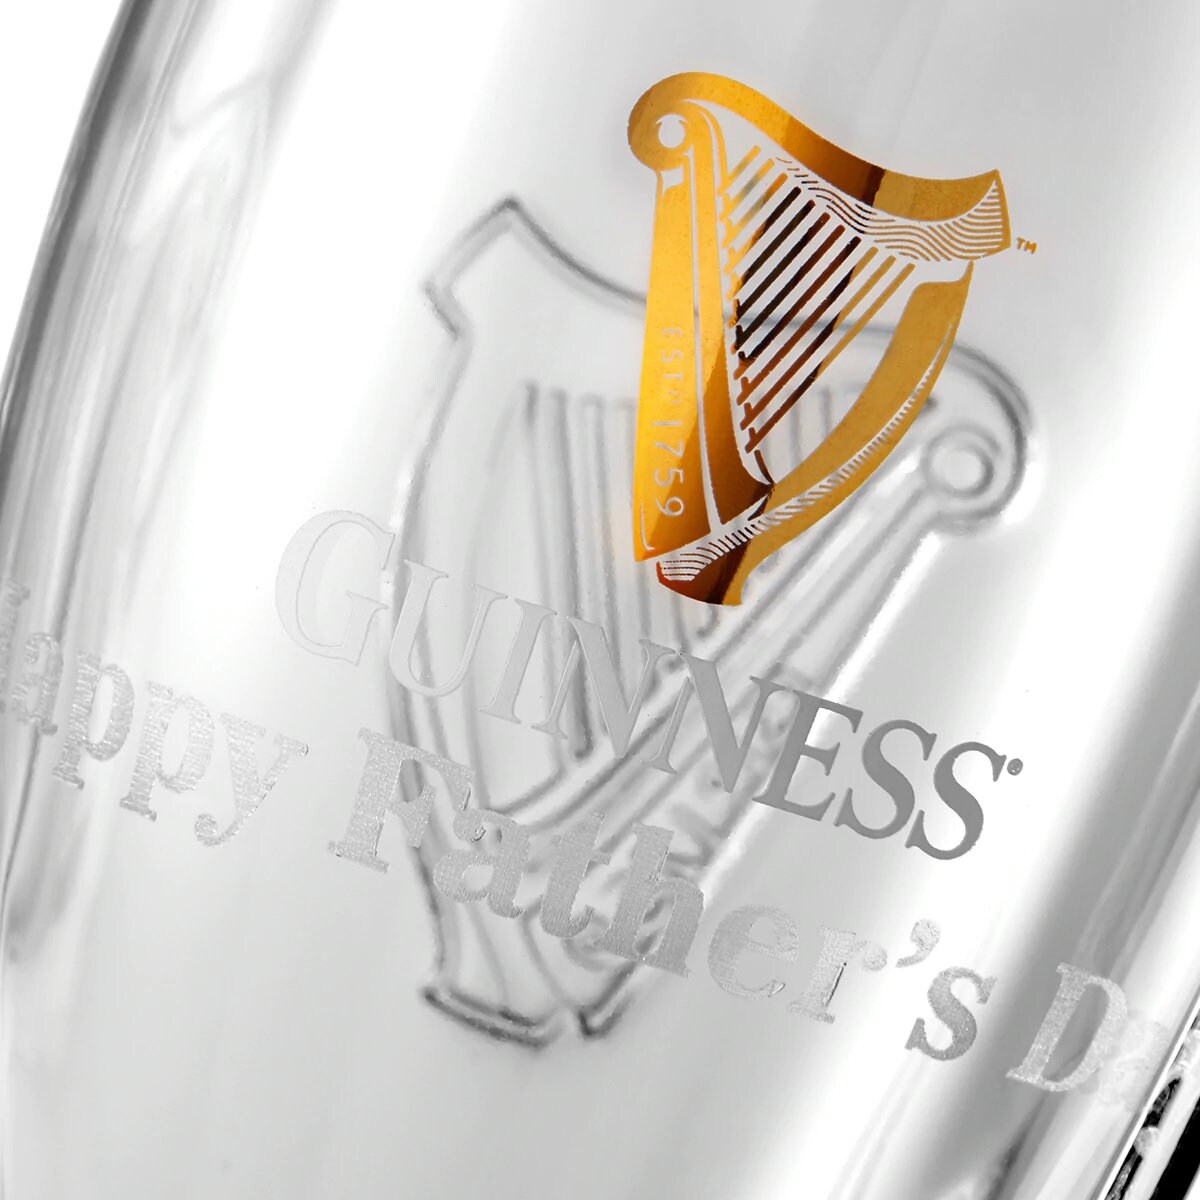 Guinness Beer Glass, Draught Pint Glass With Crown Mark, Advertising Glass,  Home Bar Accessory, Father's Day Gift, Man Cave Gift 